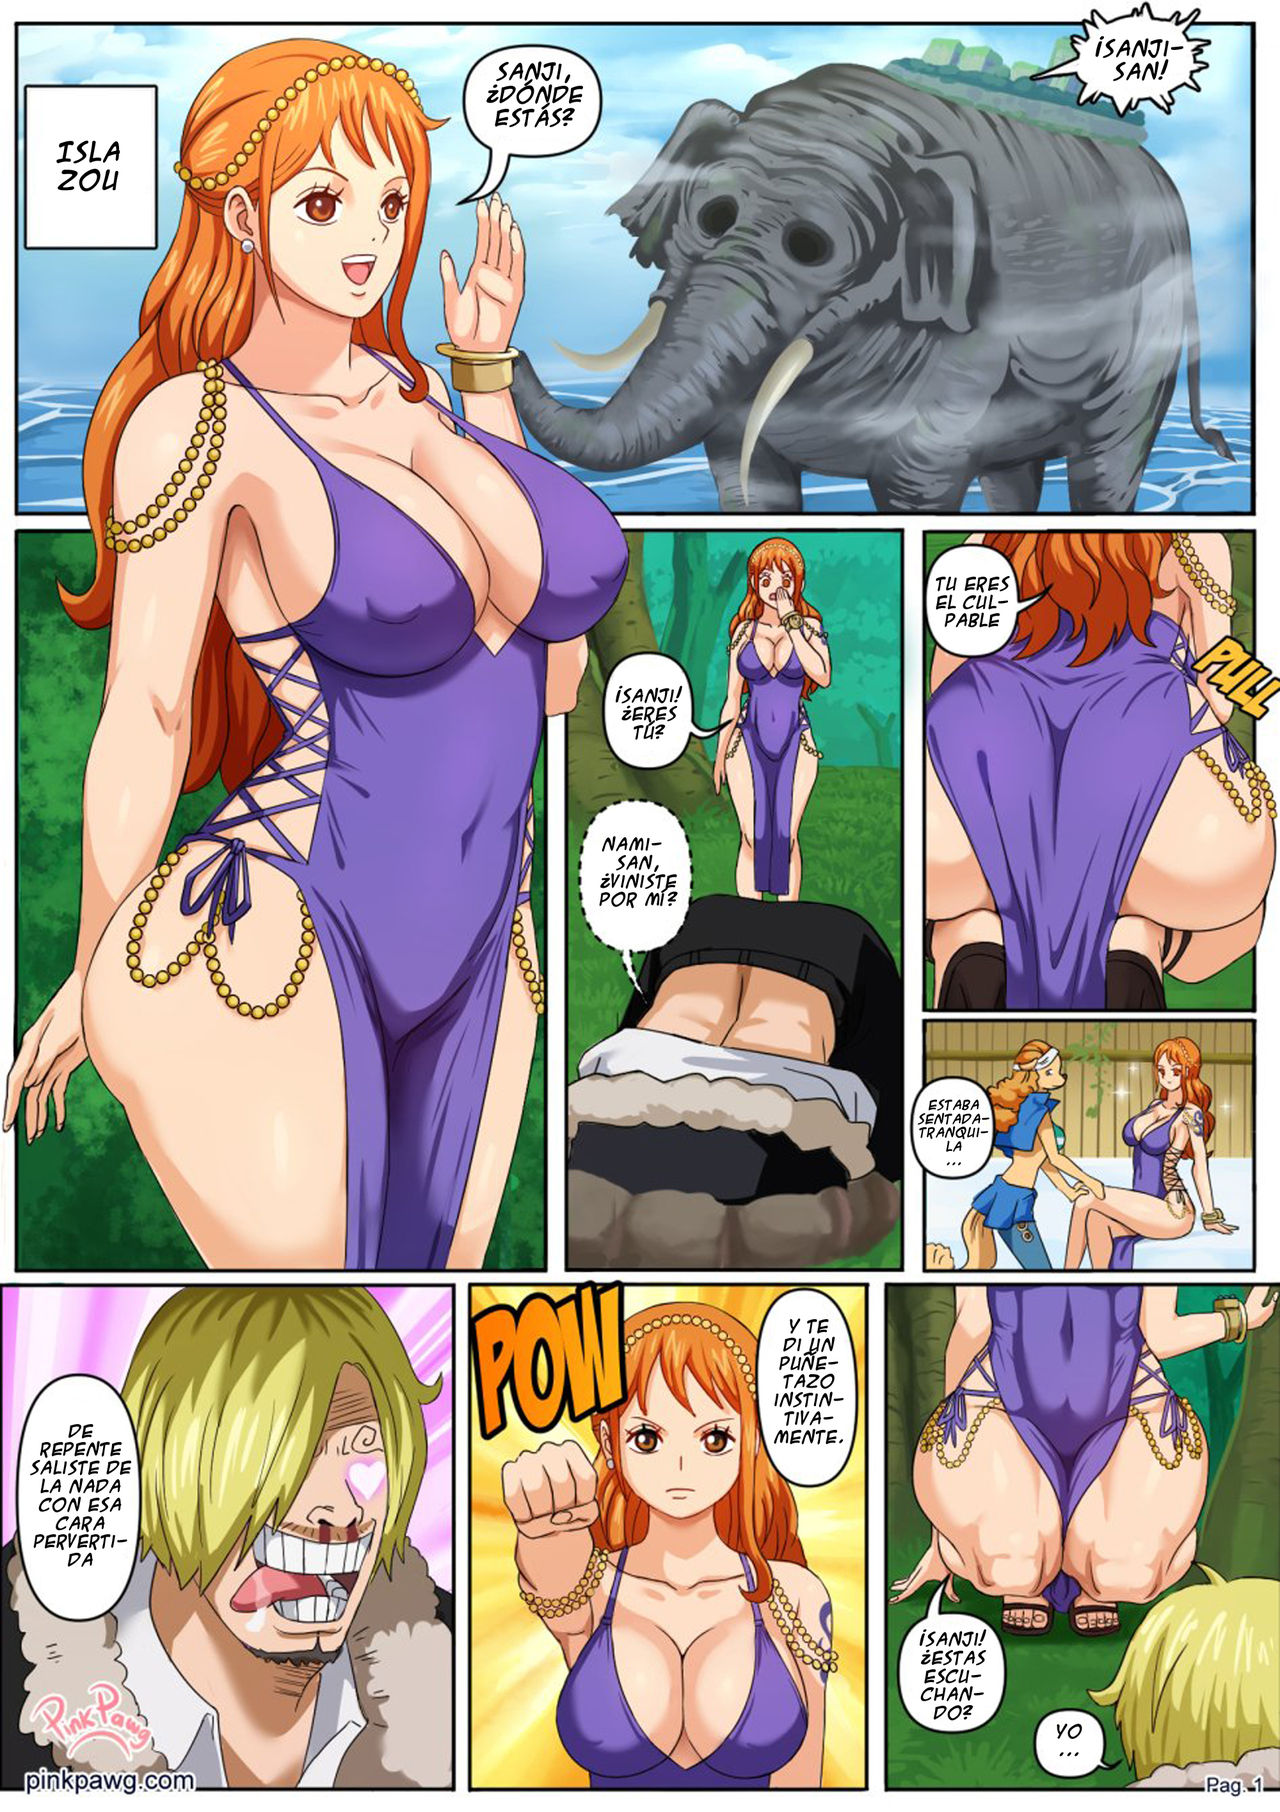 Pink Pawg- Nami in Zou Island (One Piece) - Porn Comics Galleries.